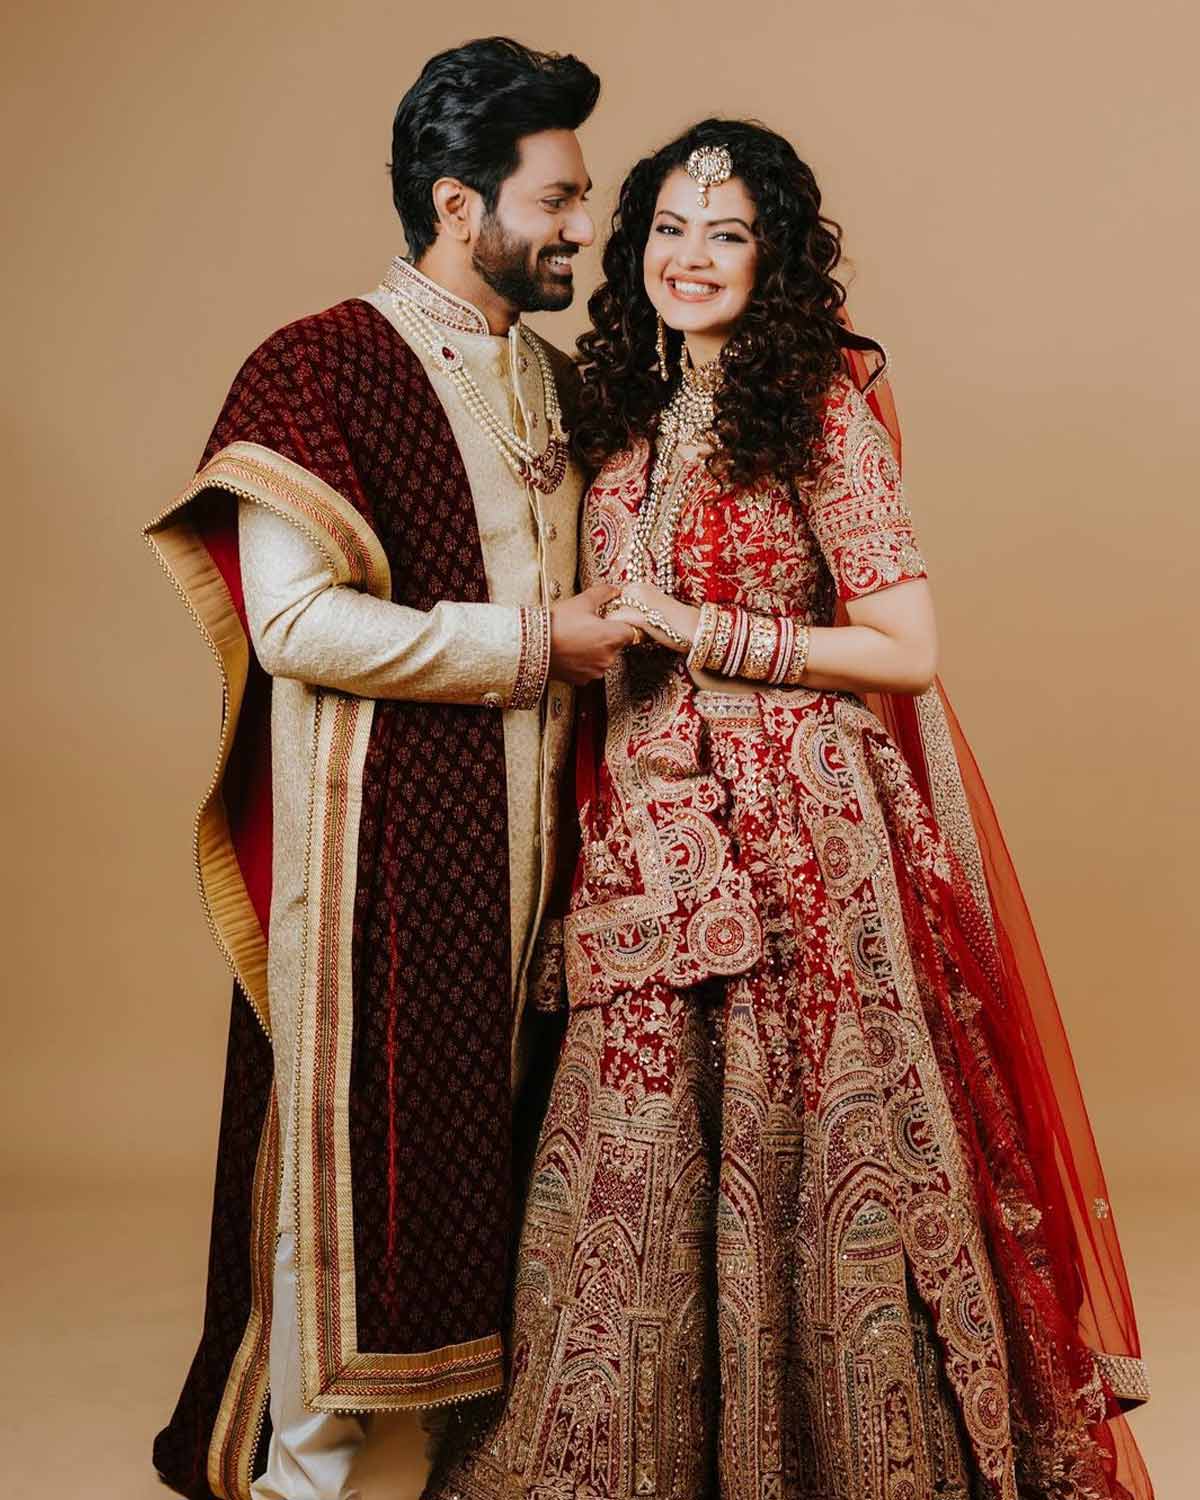 Palak Muchhal with her Husband